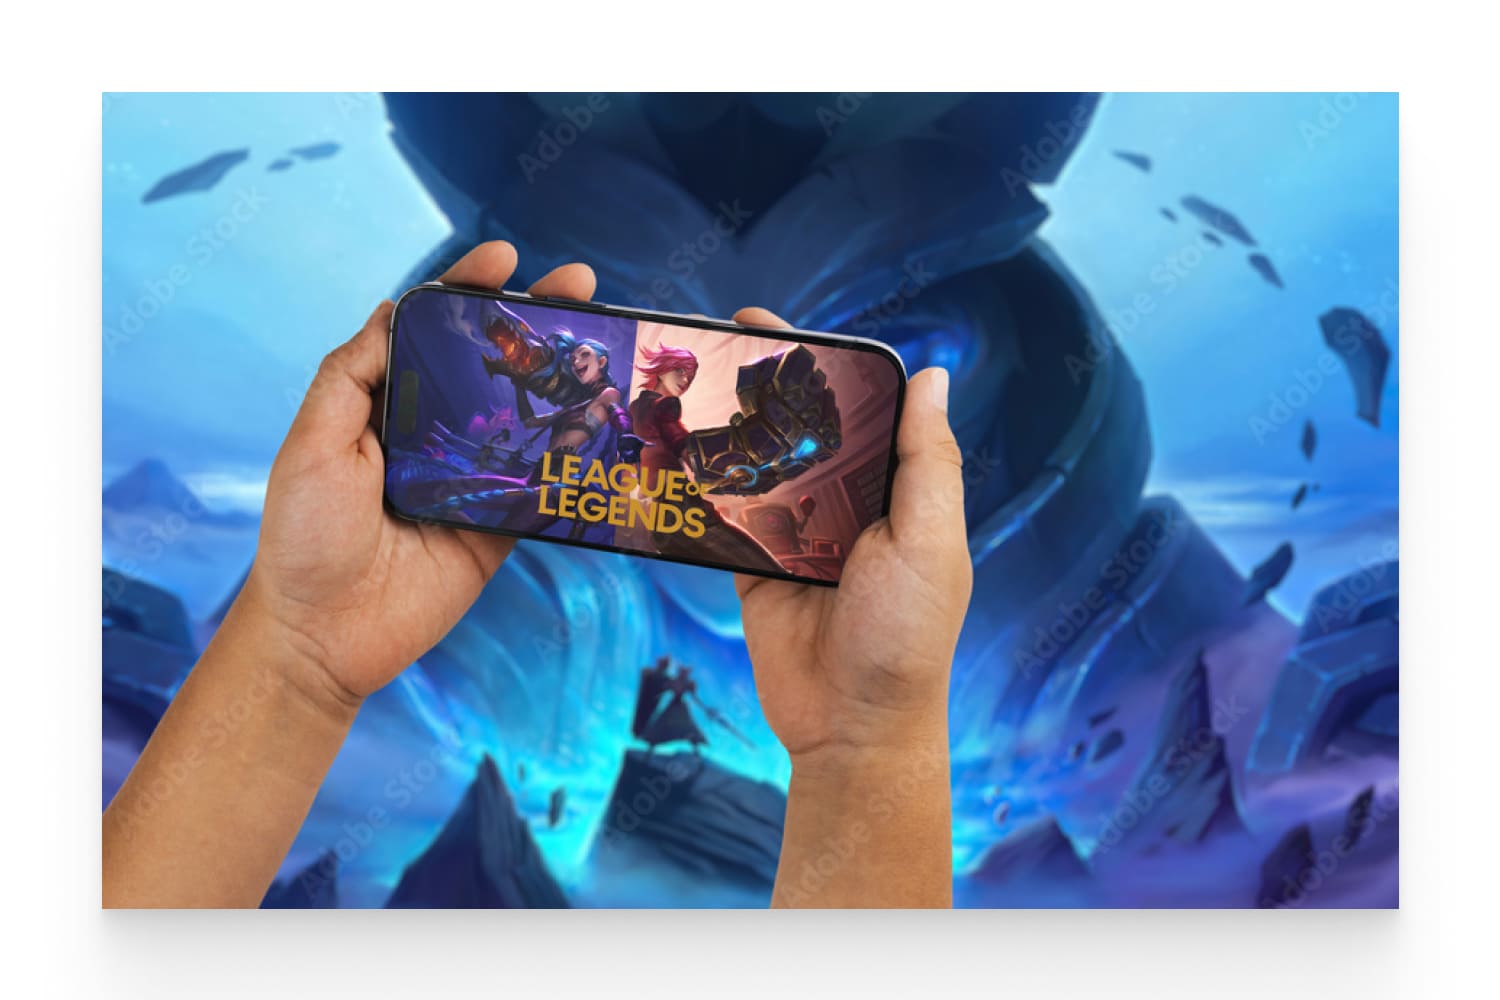 Child holding a smartphone iPhone 14 Pro with League of Legends.